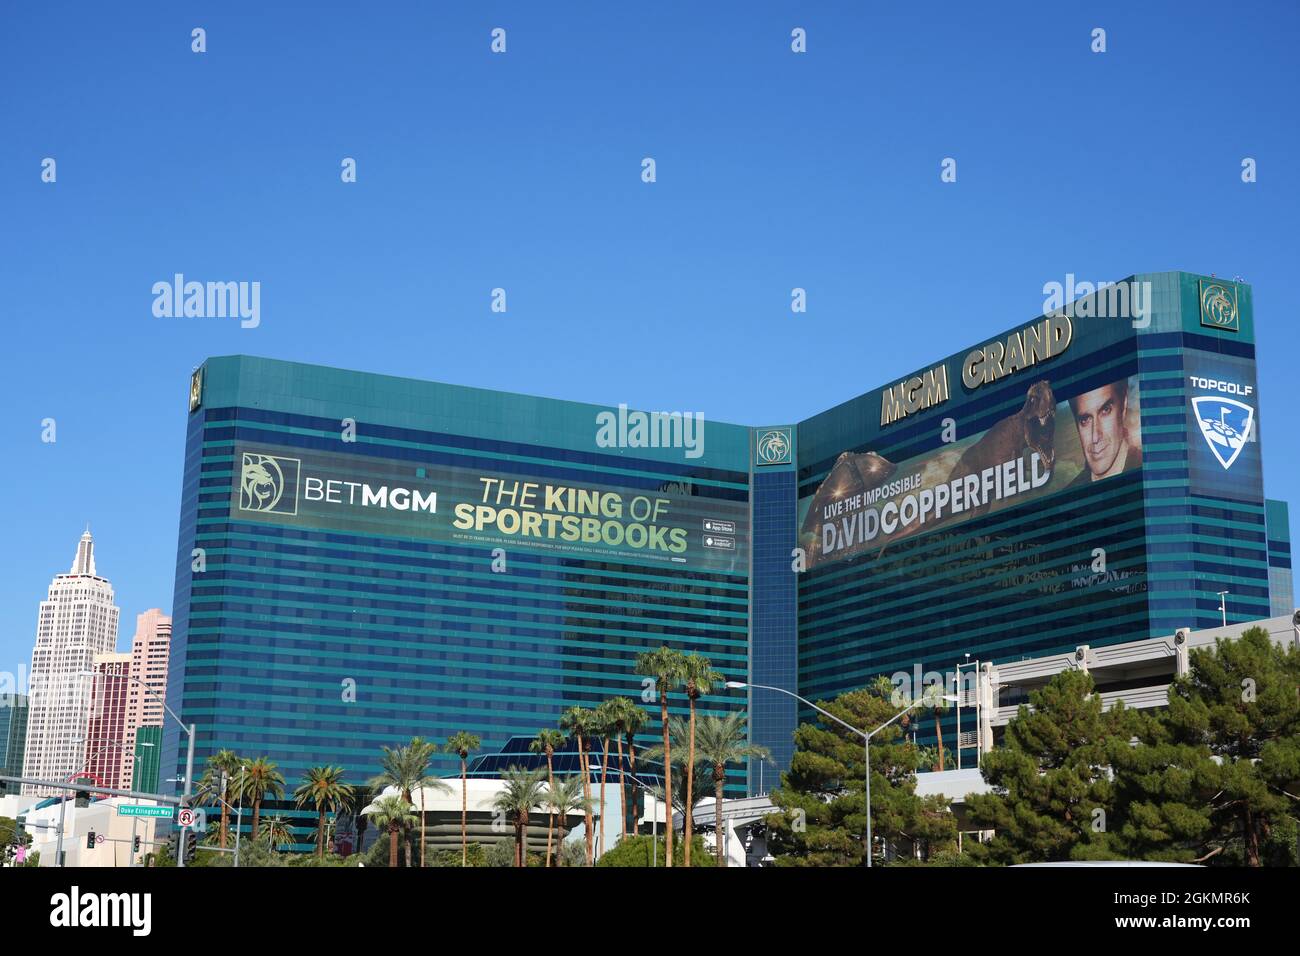 The MGM Grand Hotel, Tuesday, Sept. 14, 2021, in Las Vegas. Stock Photo